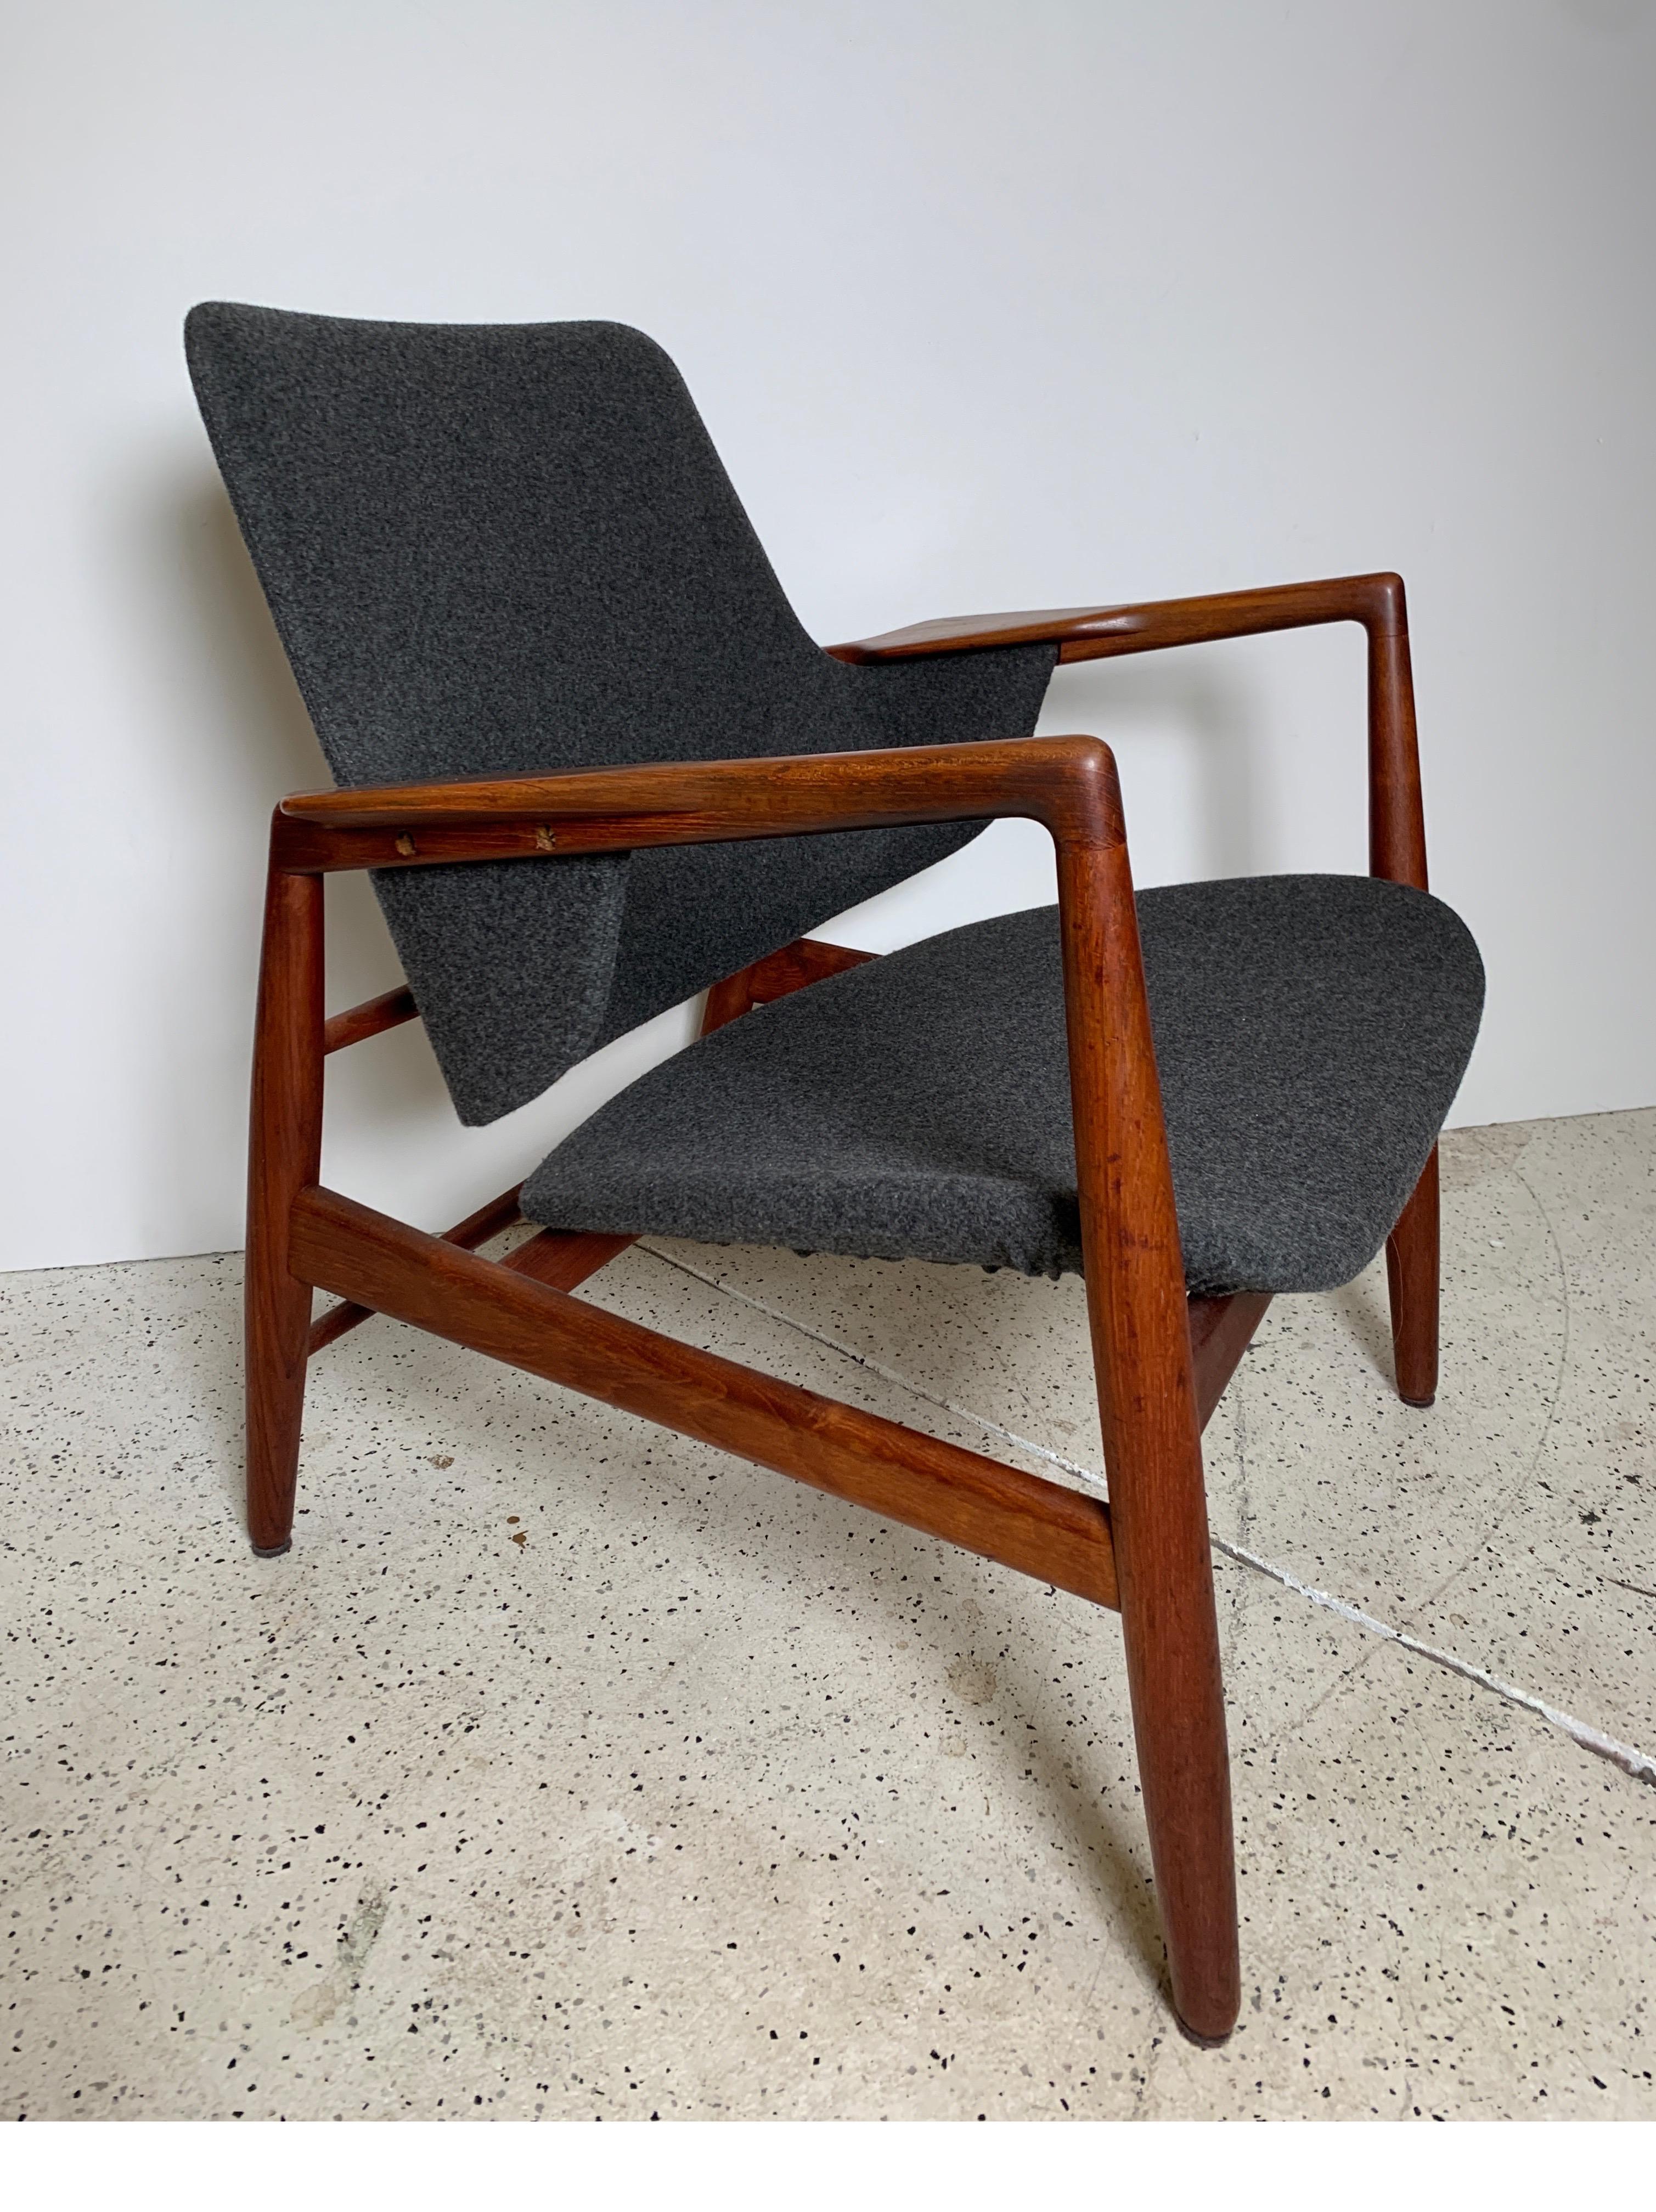 This scarce and beautiful chair, designed in 1953 by Ib Kofod Larsen, was executed by cabinetmaker Carlo Gahrn and retailed by Bovirke. The frame has been lightly restored, with attention paid to preserving patina and signs of age and use,